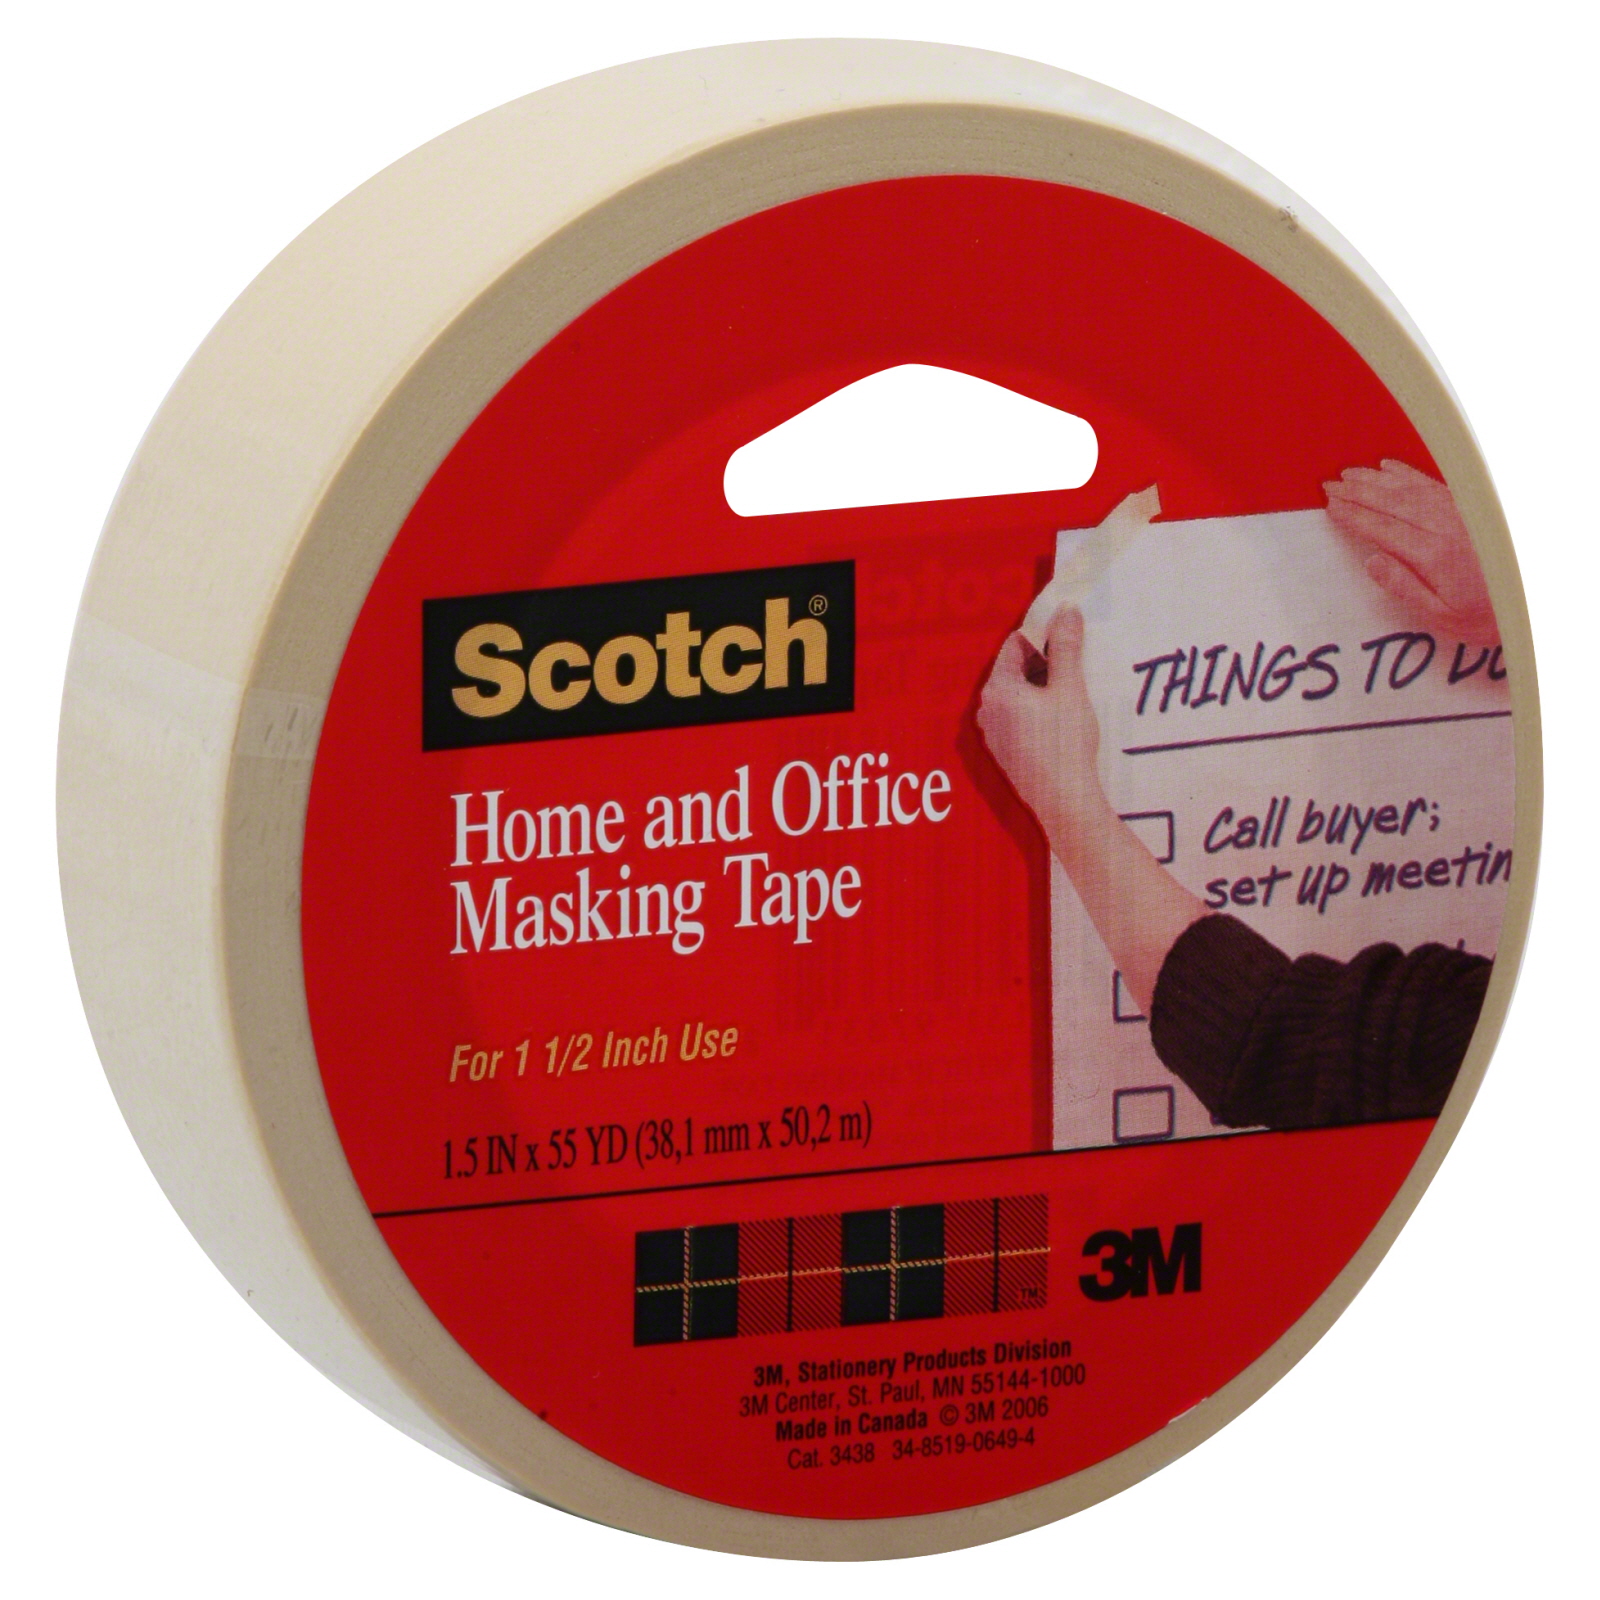 3M 3438 Scotch Home and Office Masking Tape, 1.5 in